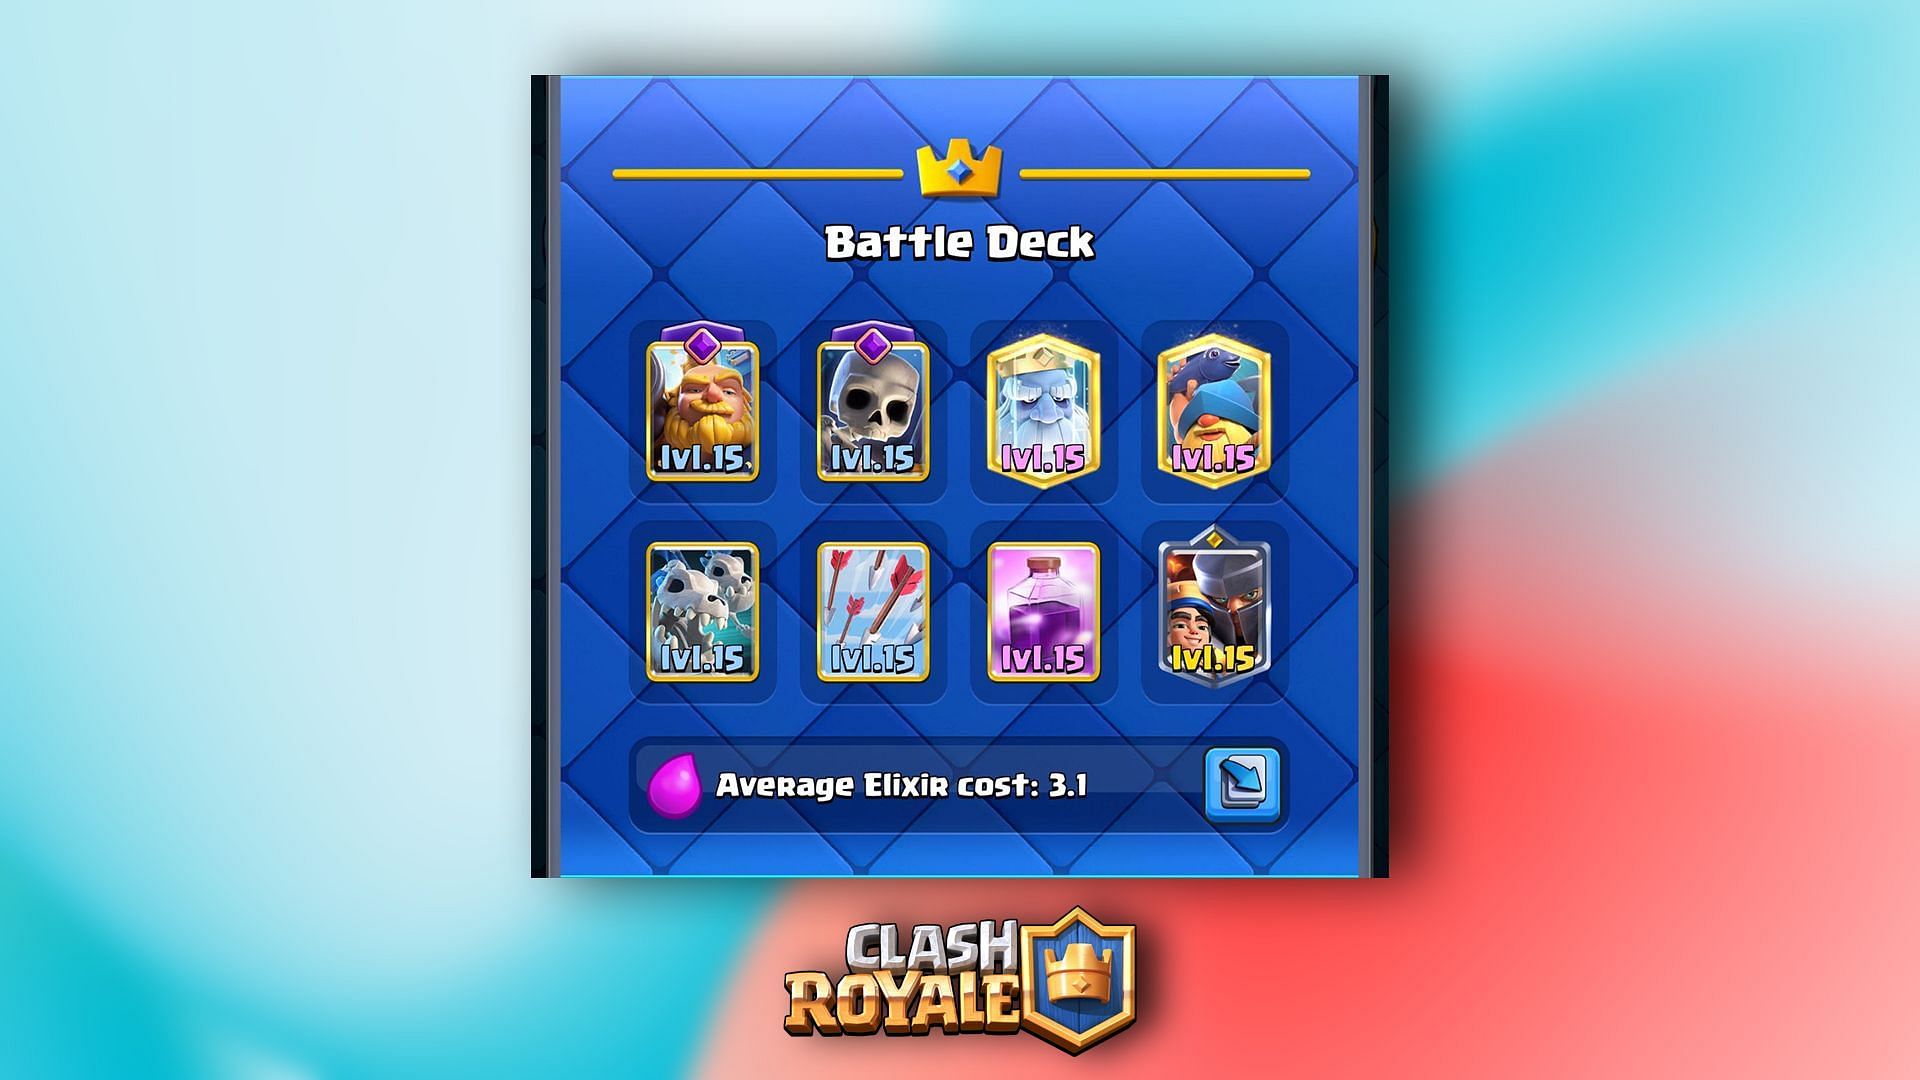 Royal Giant cycle is among the best clash royale decks for Arena 15 (Image via Supercell)